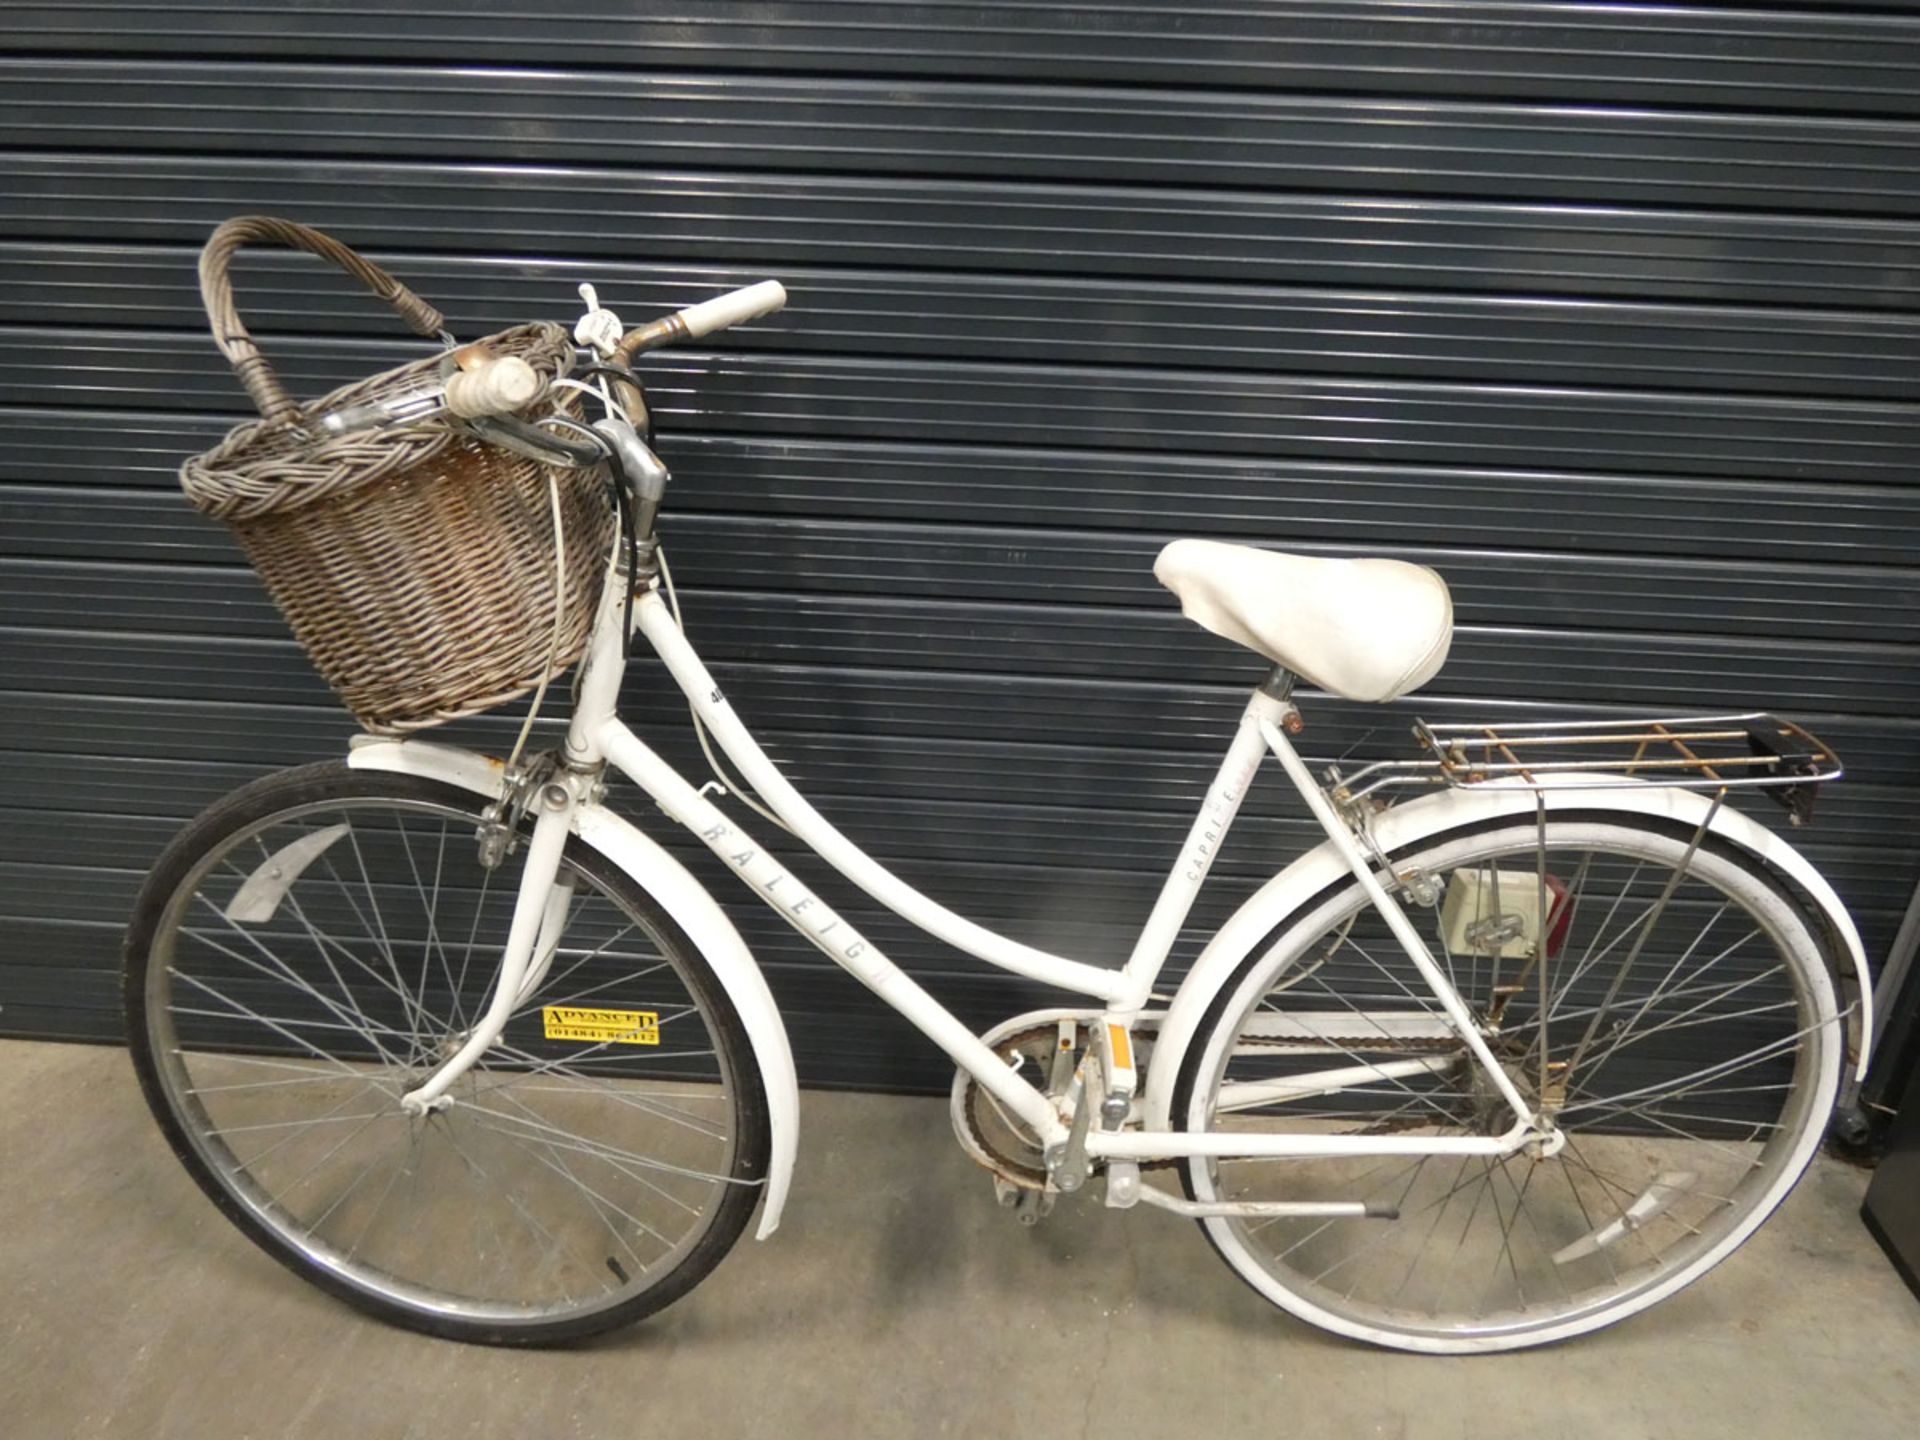 Raleigh Caprice white ladies bike with basket